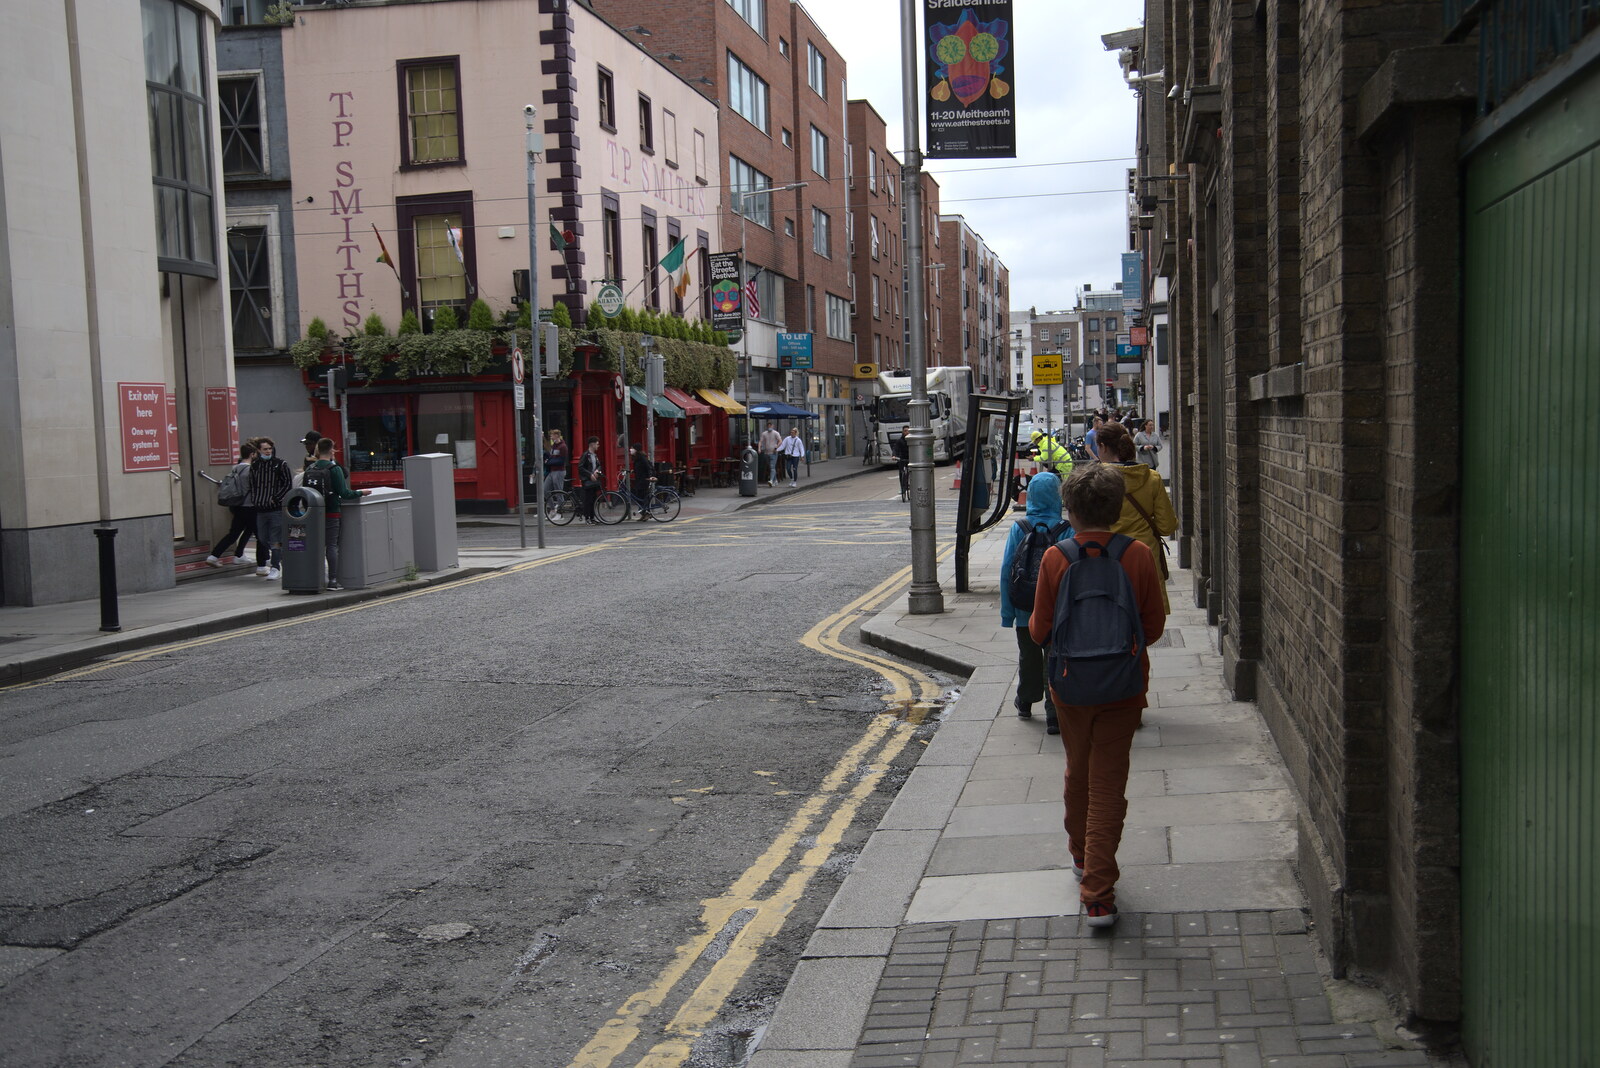 Fred on Jarvis Street from A Trip to Noddy's, and Dublin City Centre, Wicklow and Dublin, Ireland - 16th August 2021